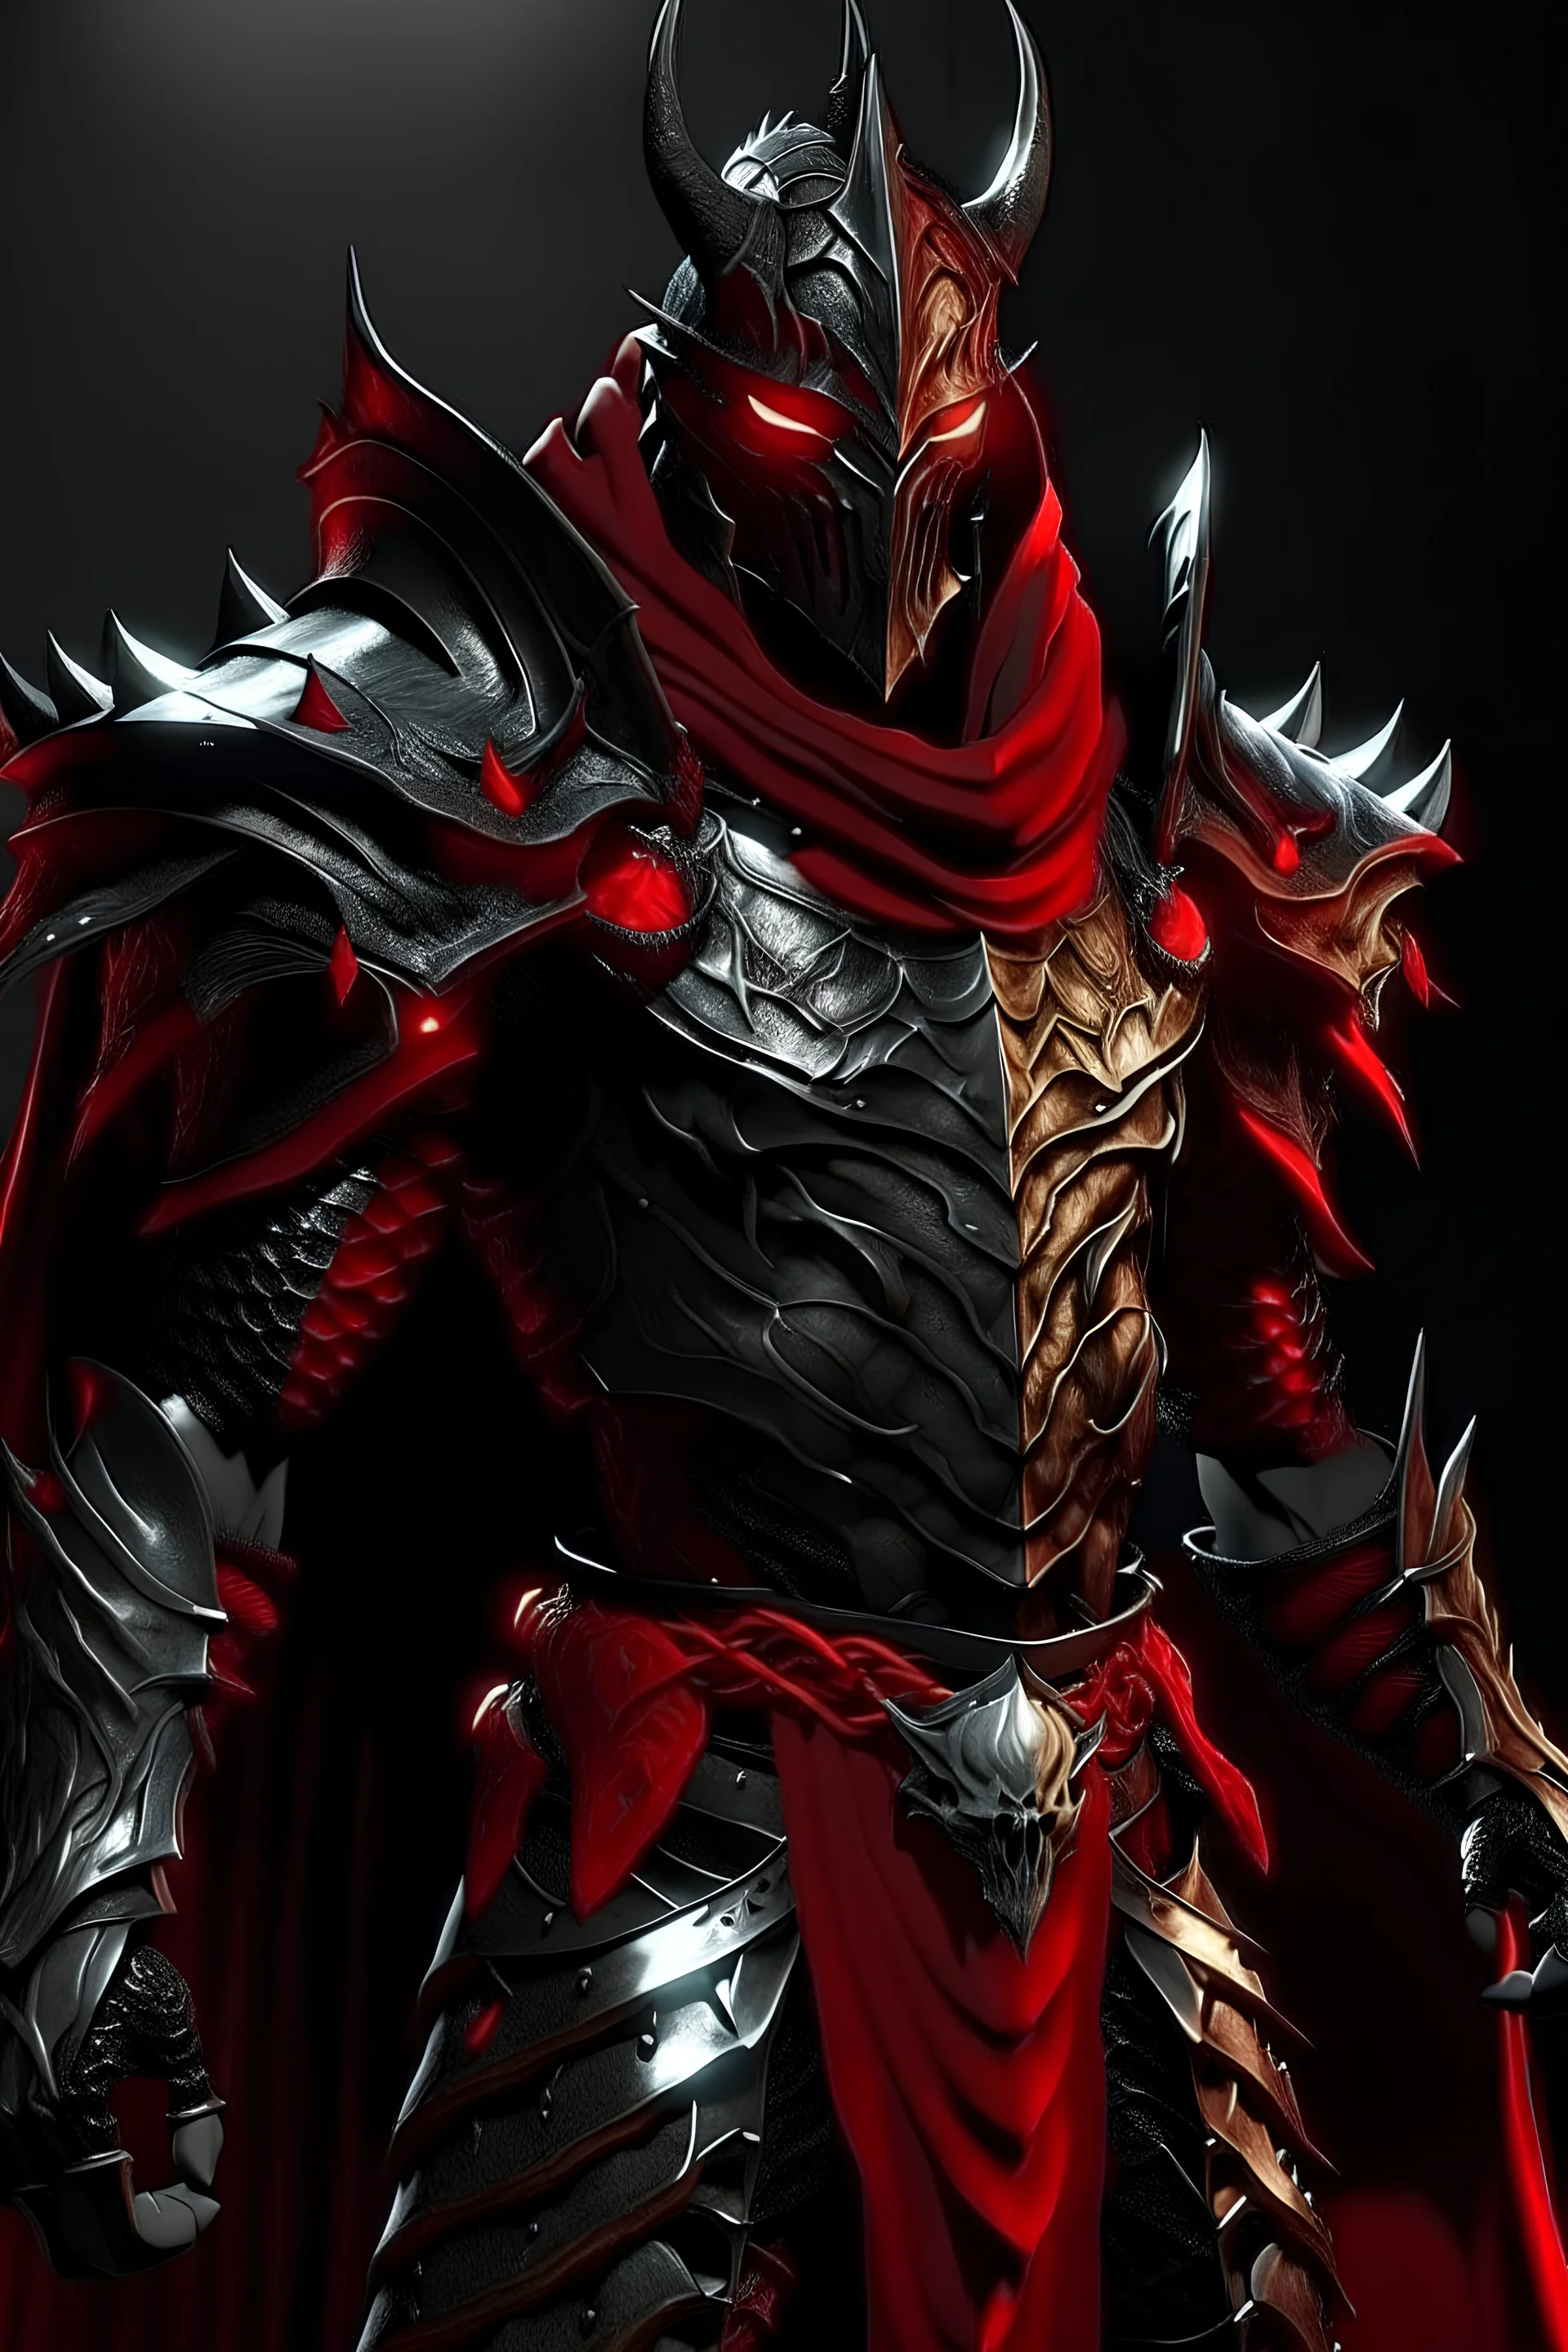 Silver and red fantasy demon armour, with a red cape, with black and red spikes coming out the back and arms, glowing red eyes